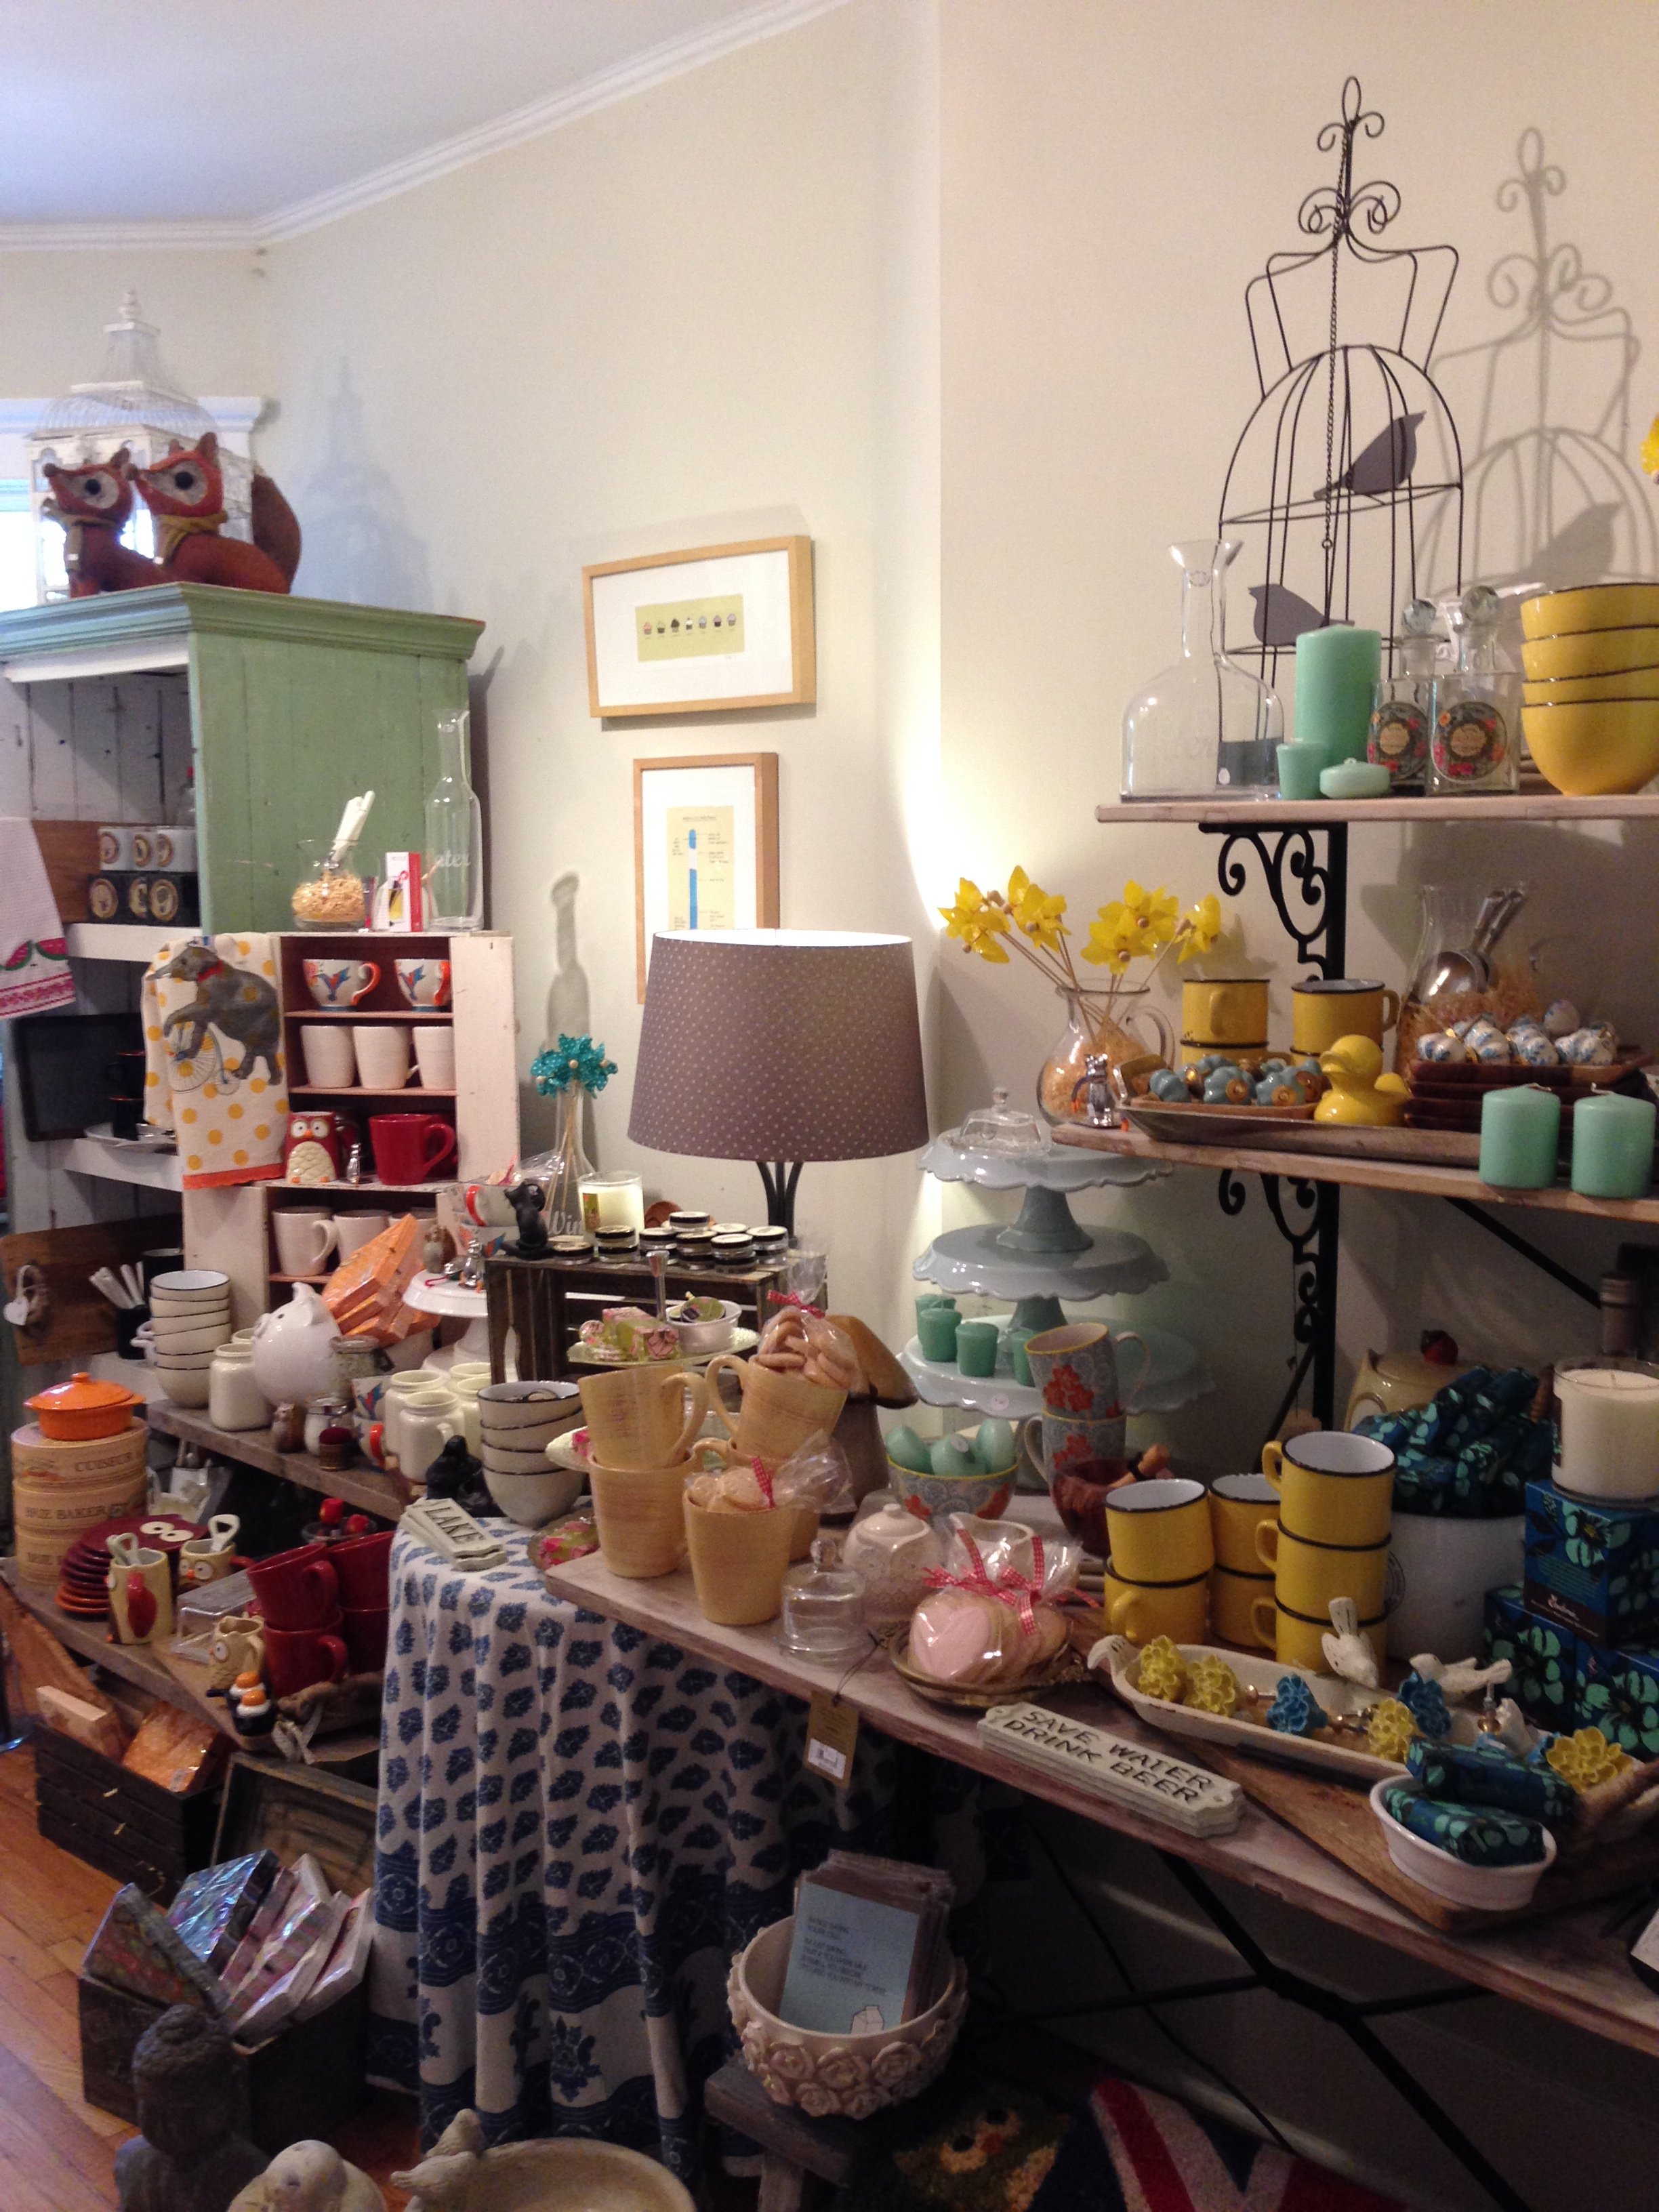 The back room full of beautiful items for the kitchen and home.